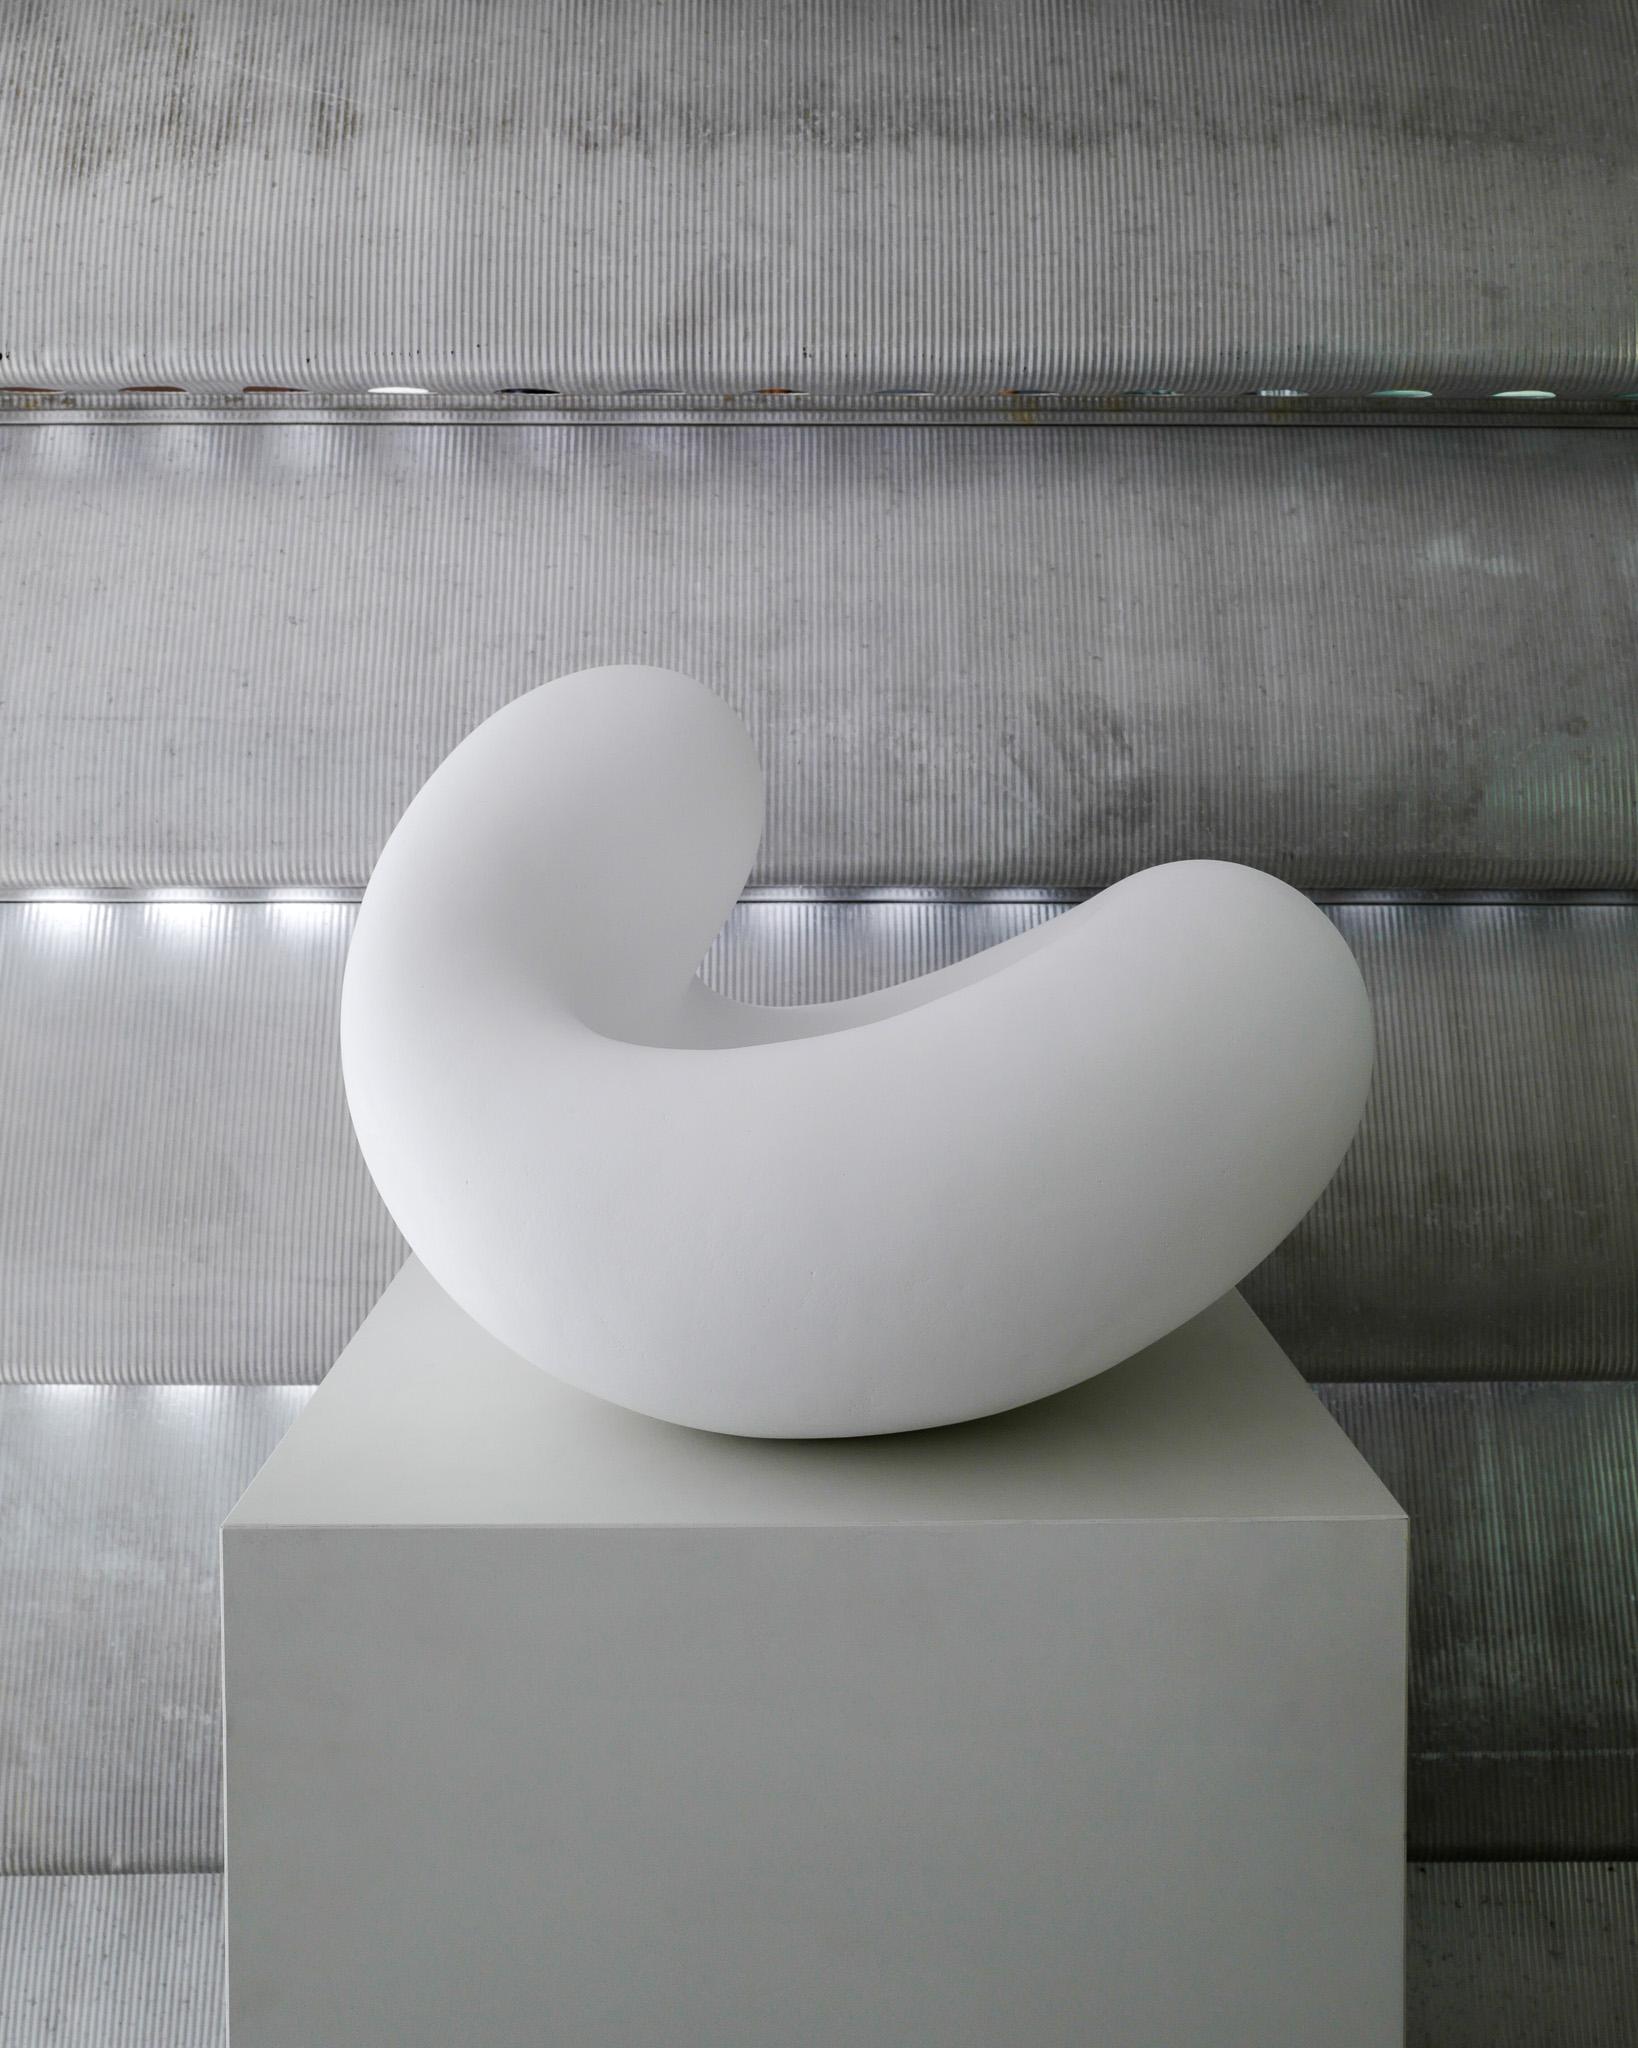 Very rare and early unique contemporary white kaolin-engobe stoneware free form sculpture by the Swedish well known artist Eva Hild. Produced in her own studio in 2000s and recently restored by her therefore an update in the signature. 

Dimensions: